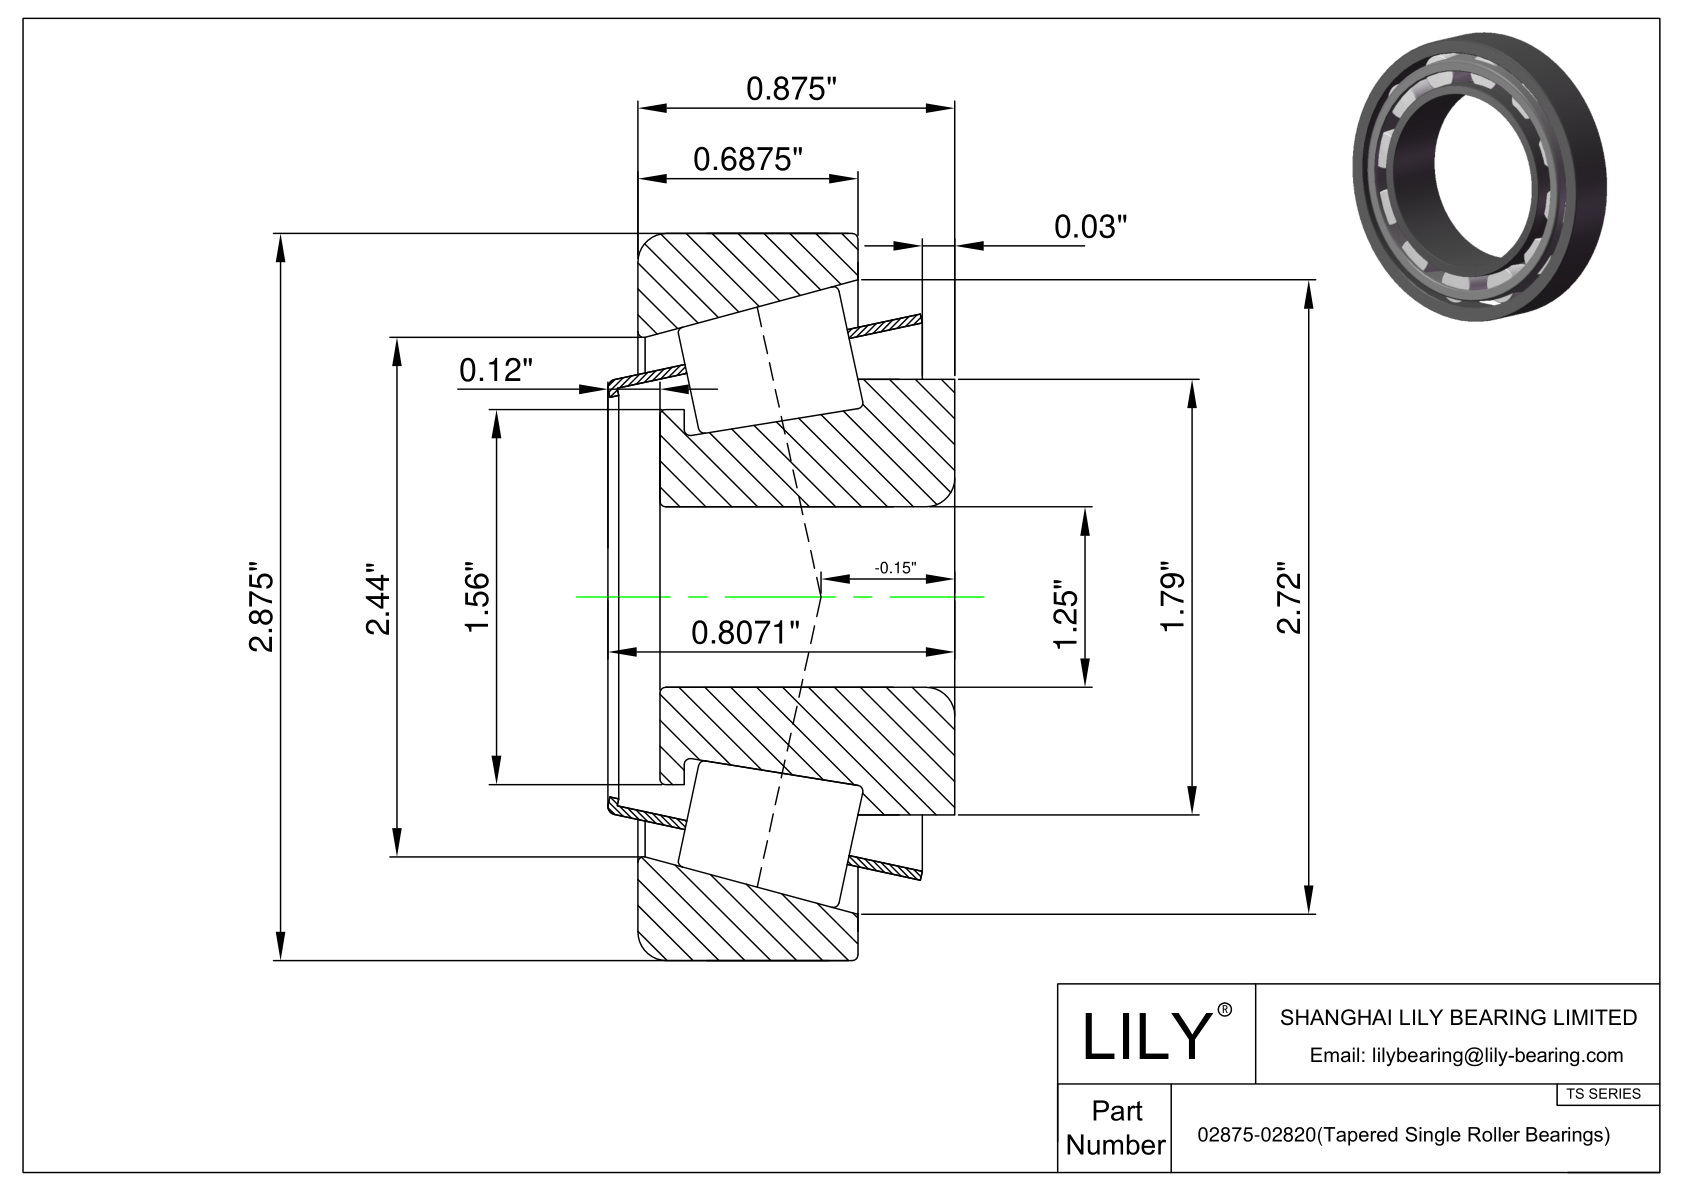 02875-02820 TS (Tapered Single Roller Bearings) (Imperial) cad drawing